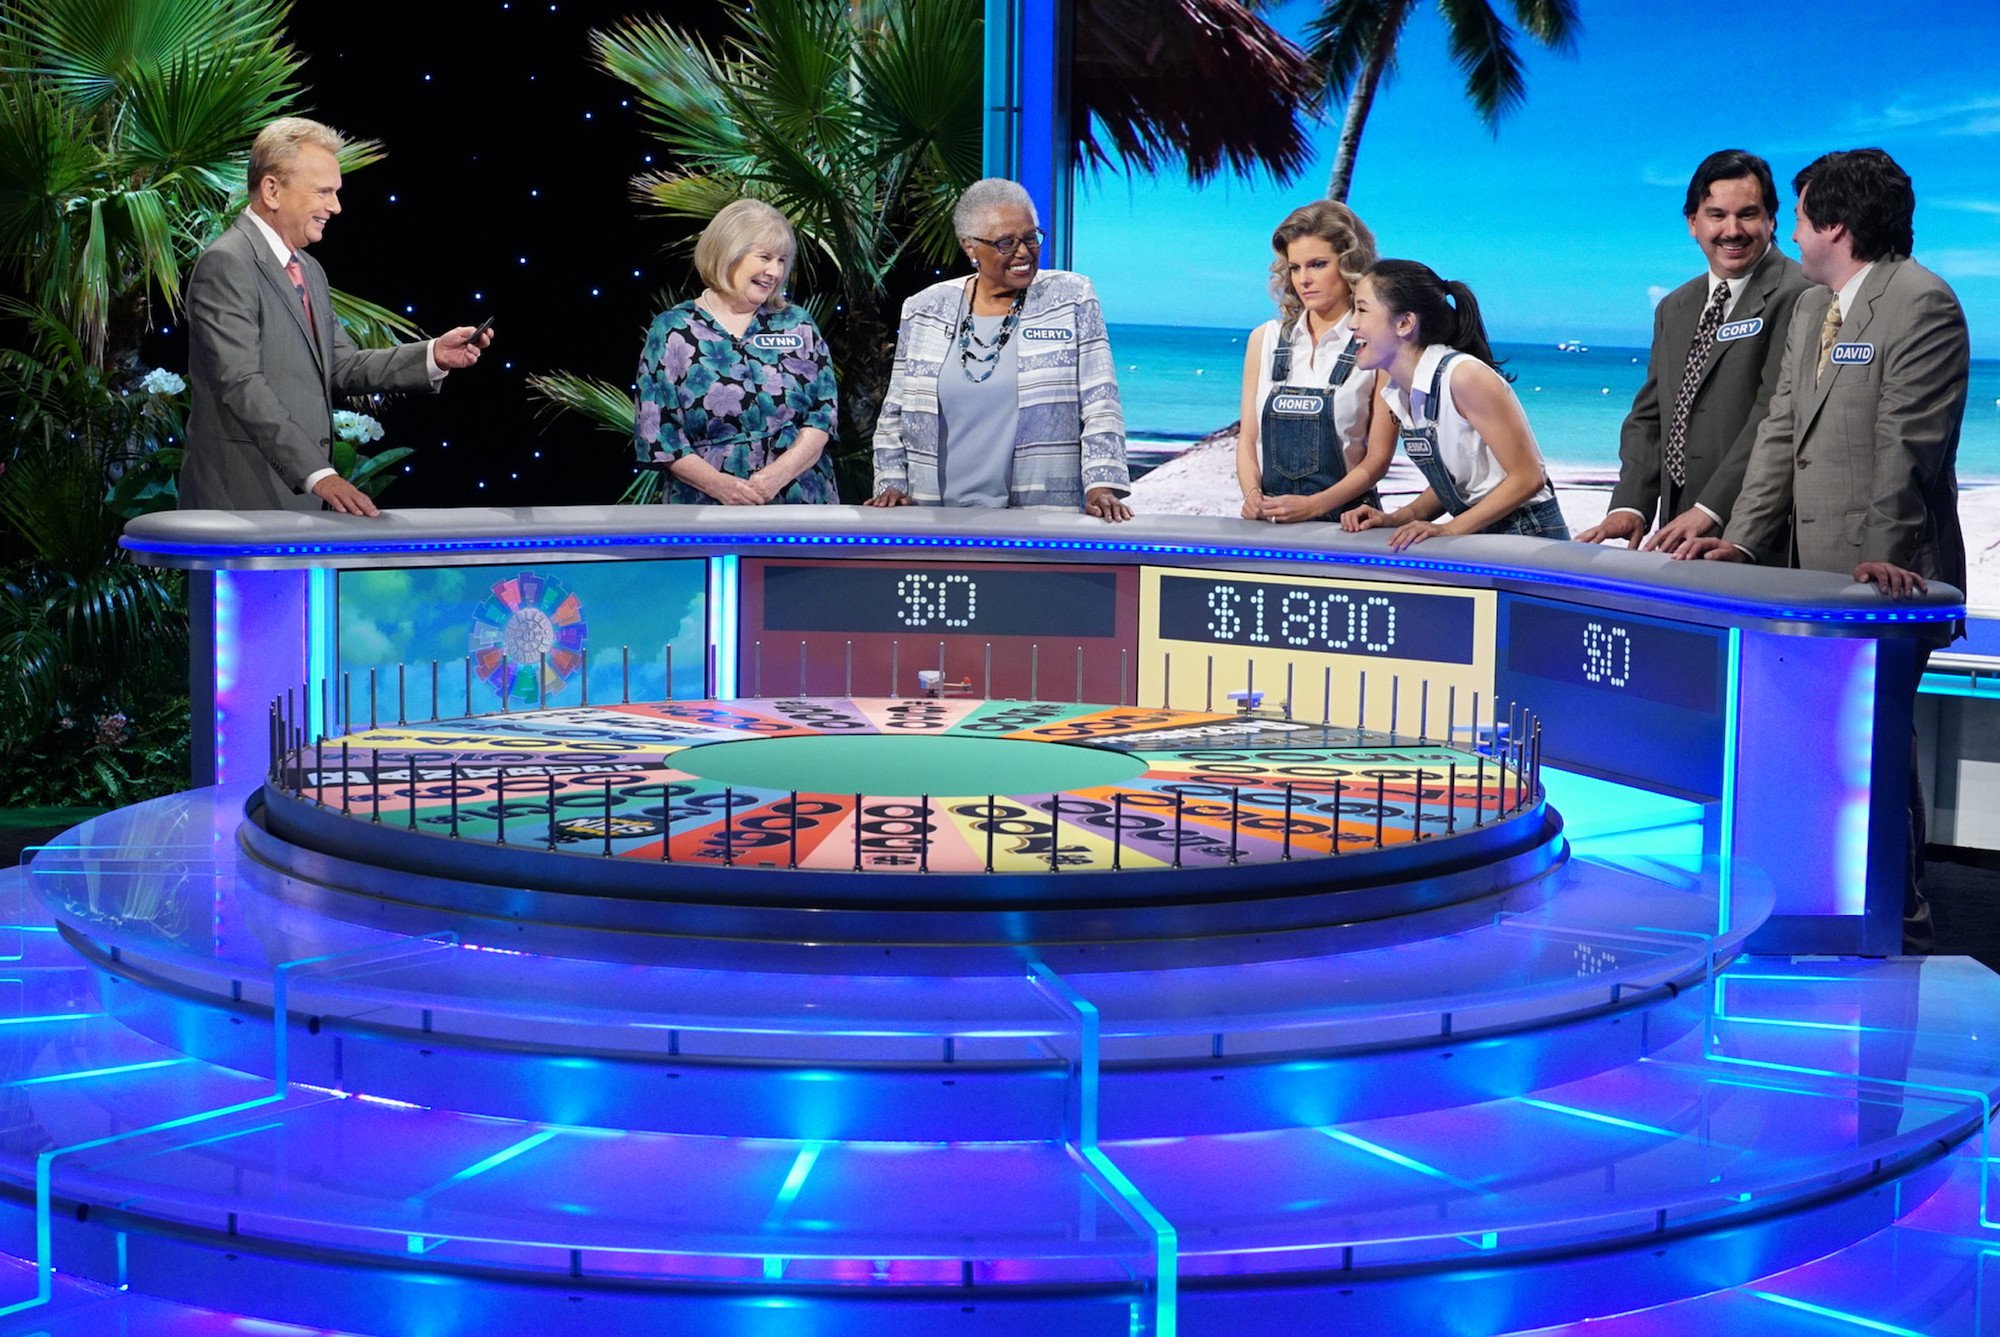 ‘Wheel of Fortune’ Makes its Coronavirus Debut With One Eye-Catching Change